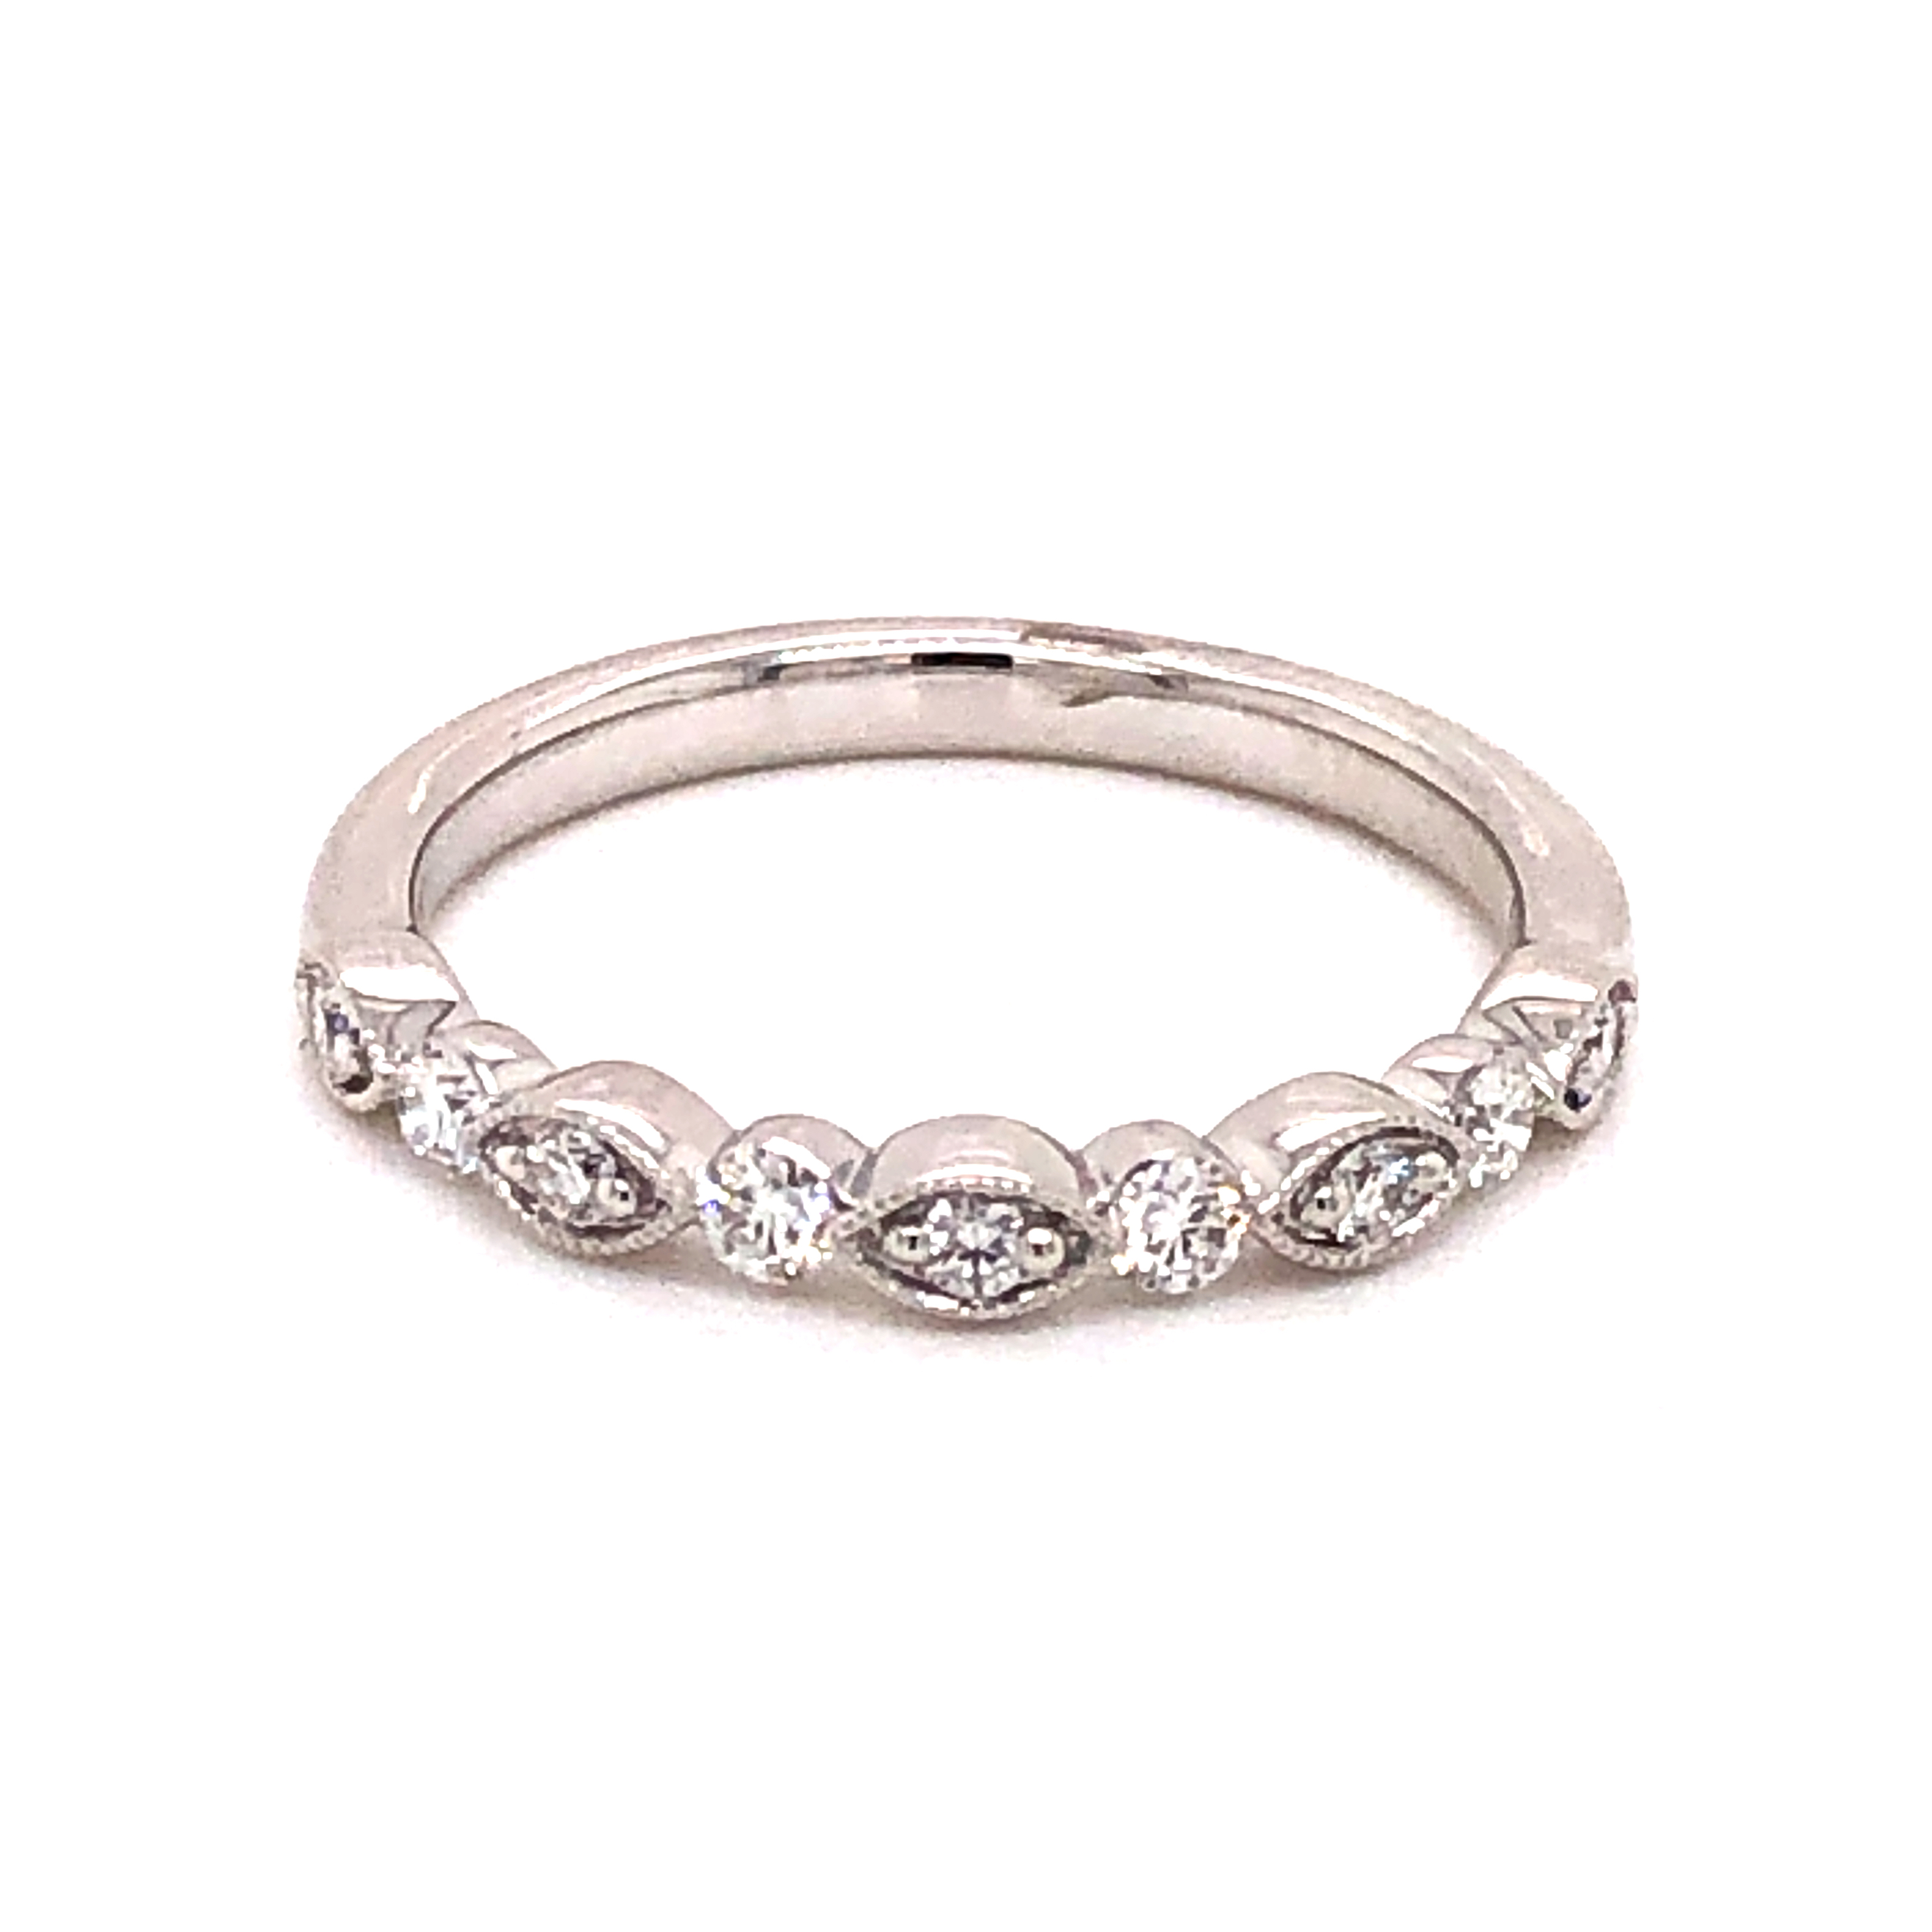 14 karat white gold band with 9=0.25 total weight round brilliant G VS Diamonds. Size 6.5